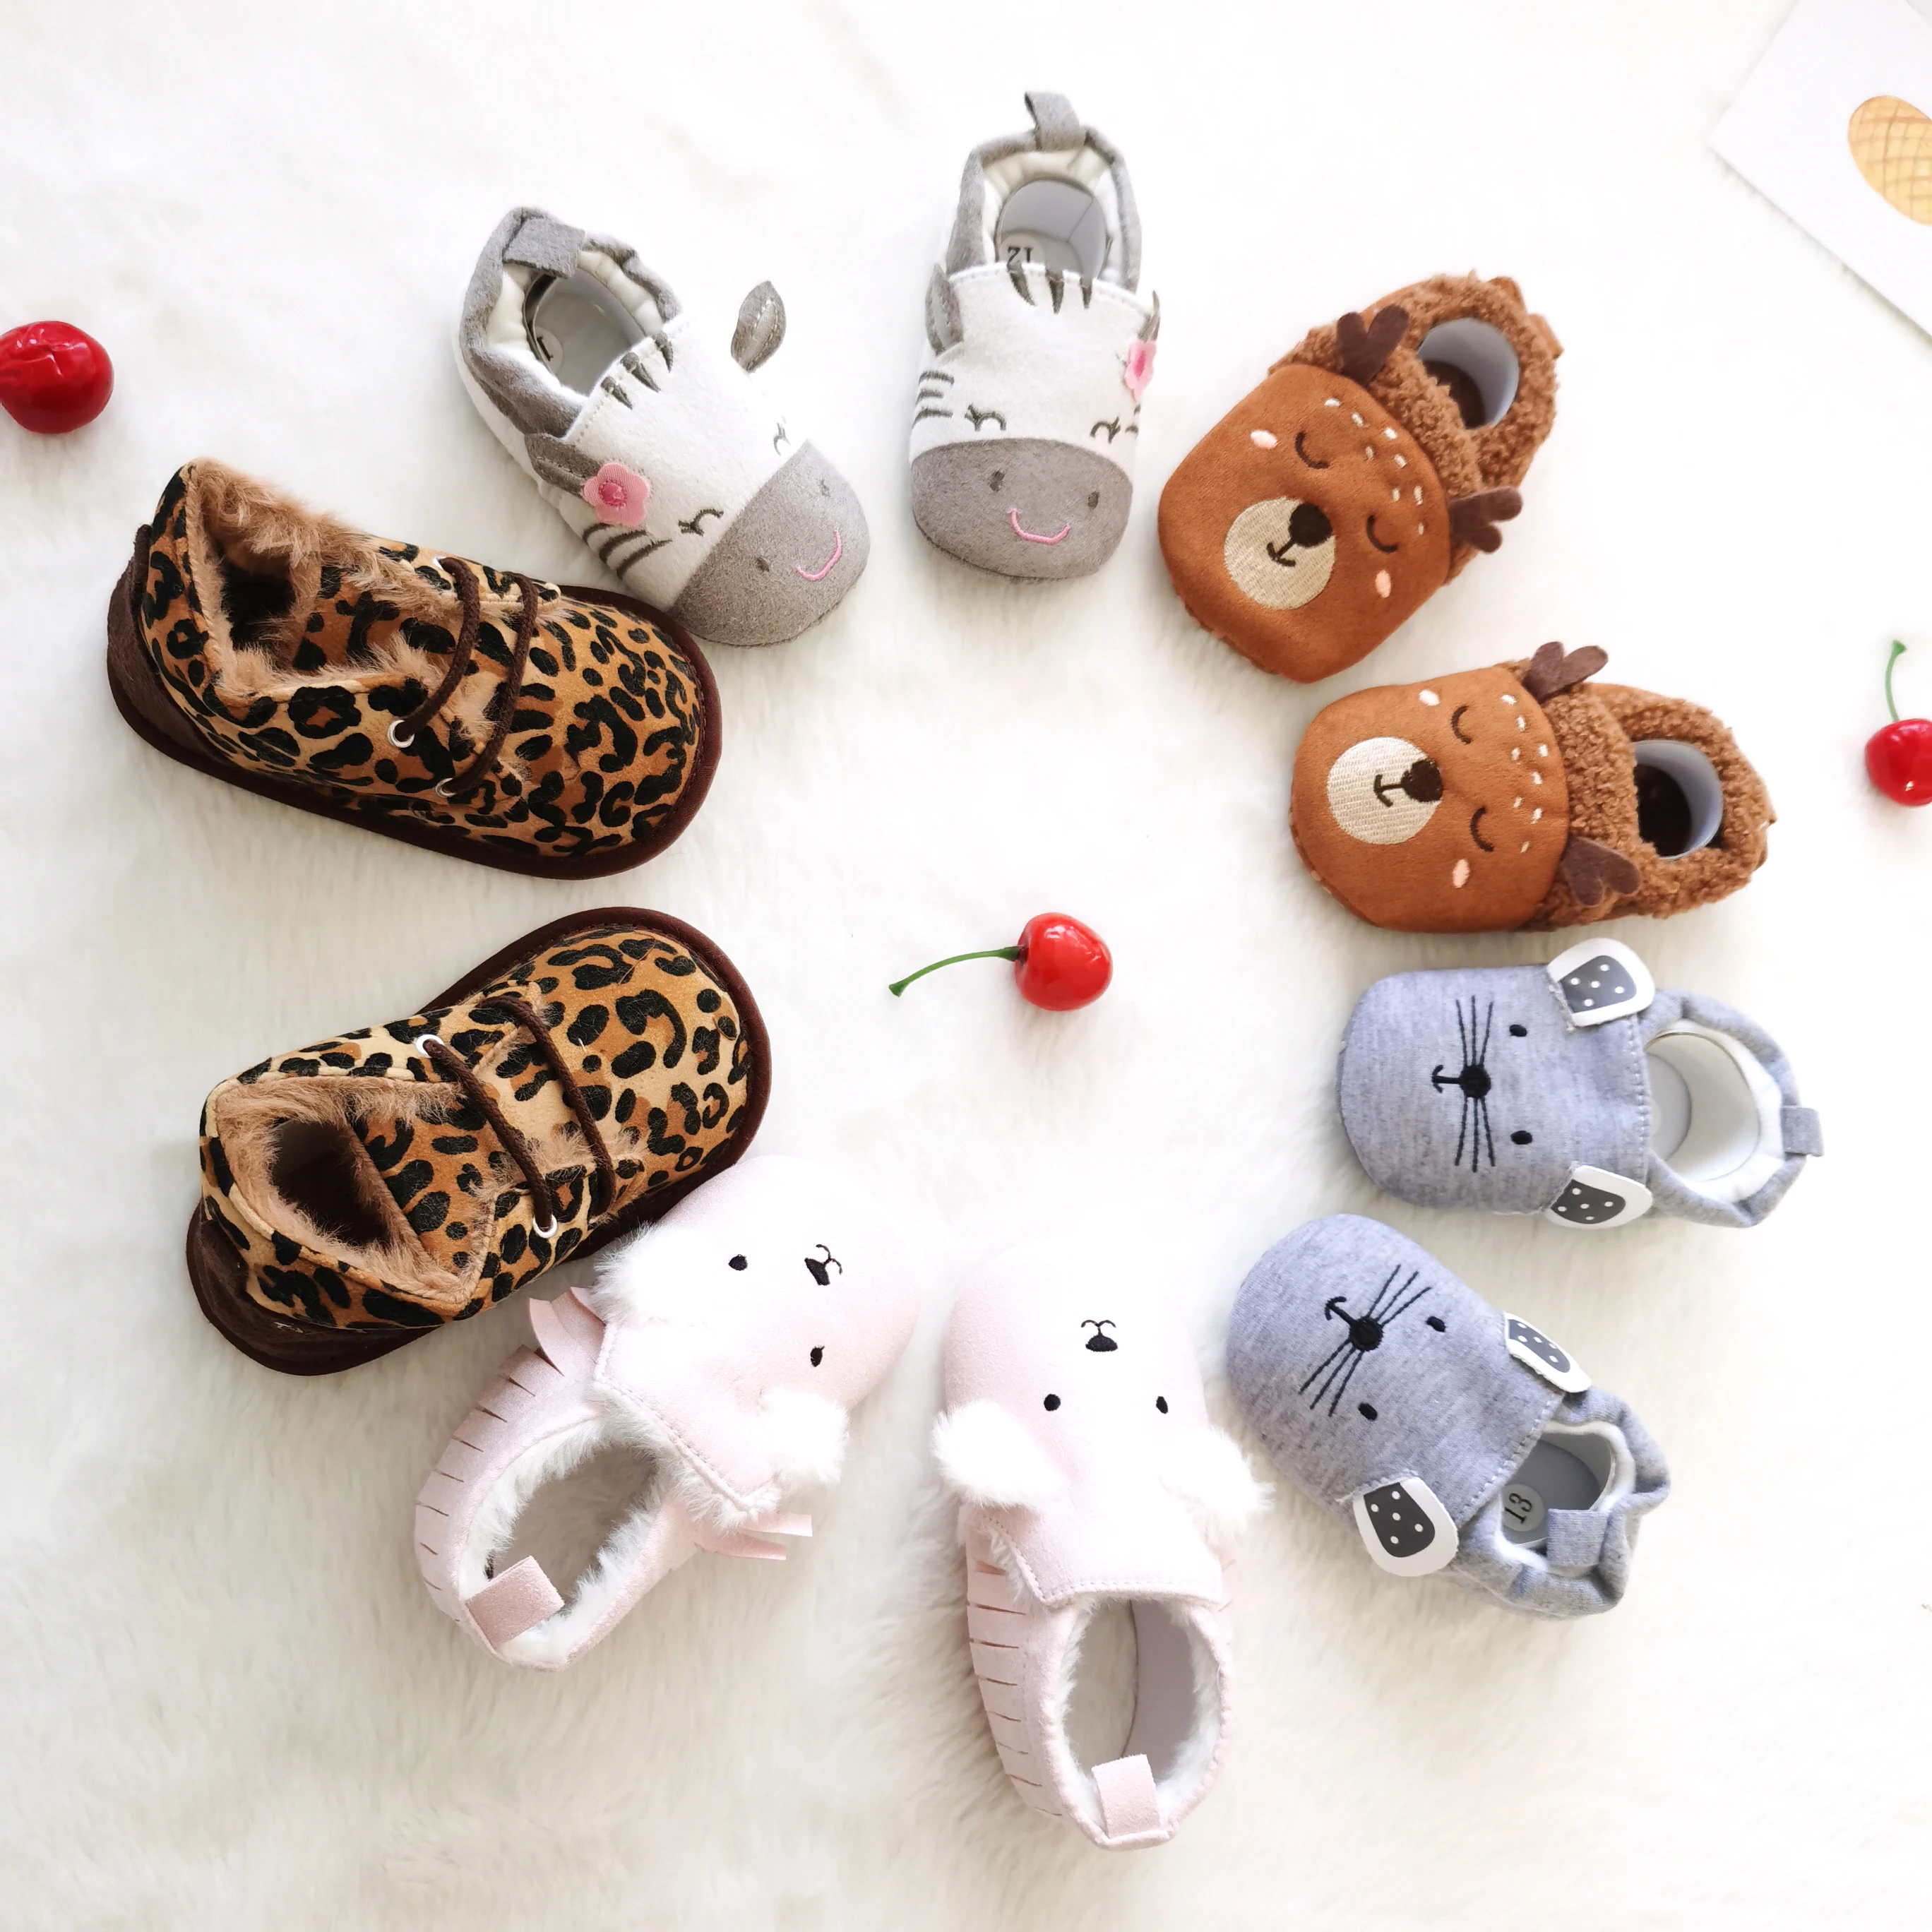 
Free Shipping New Arrival Baby Shoes Winter Warm Toddler Shoes Baby Cartoon Boots 